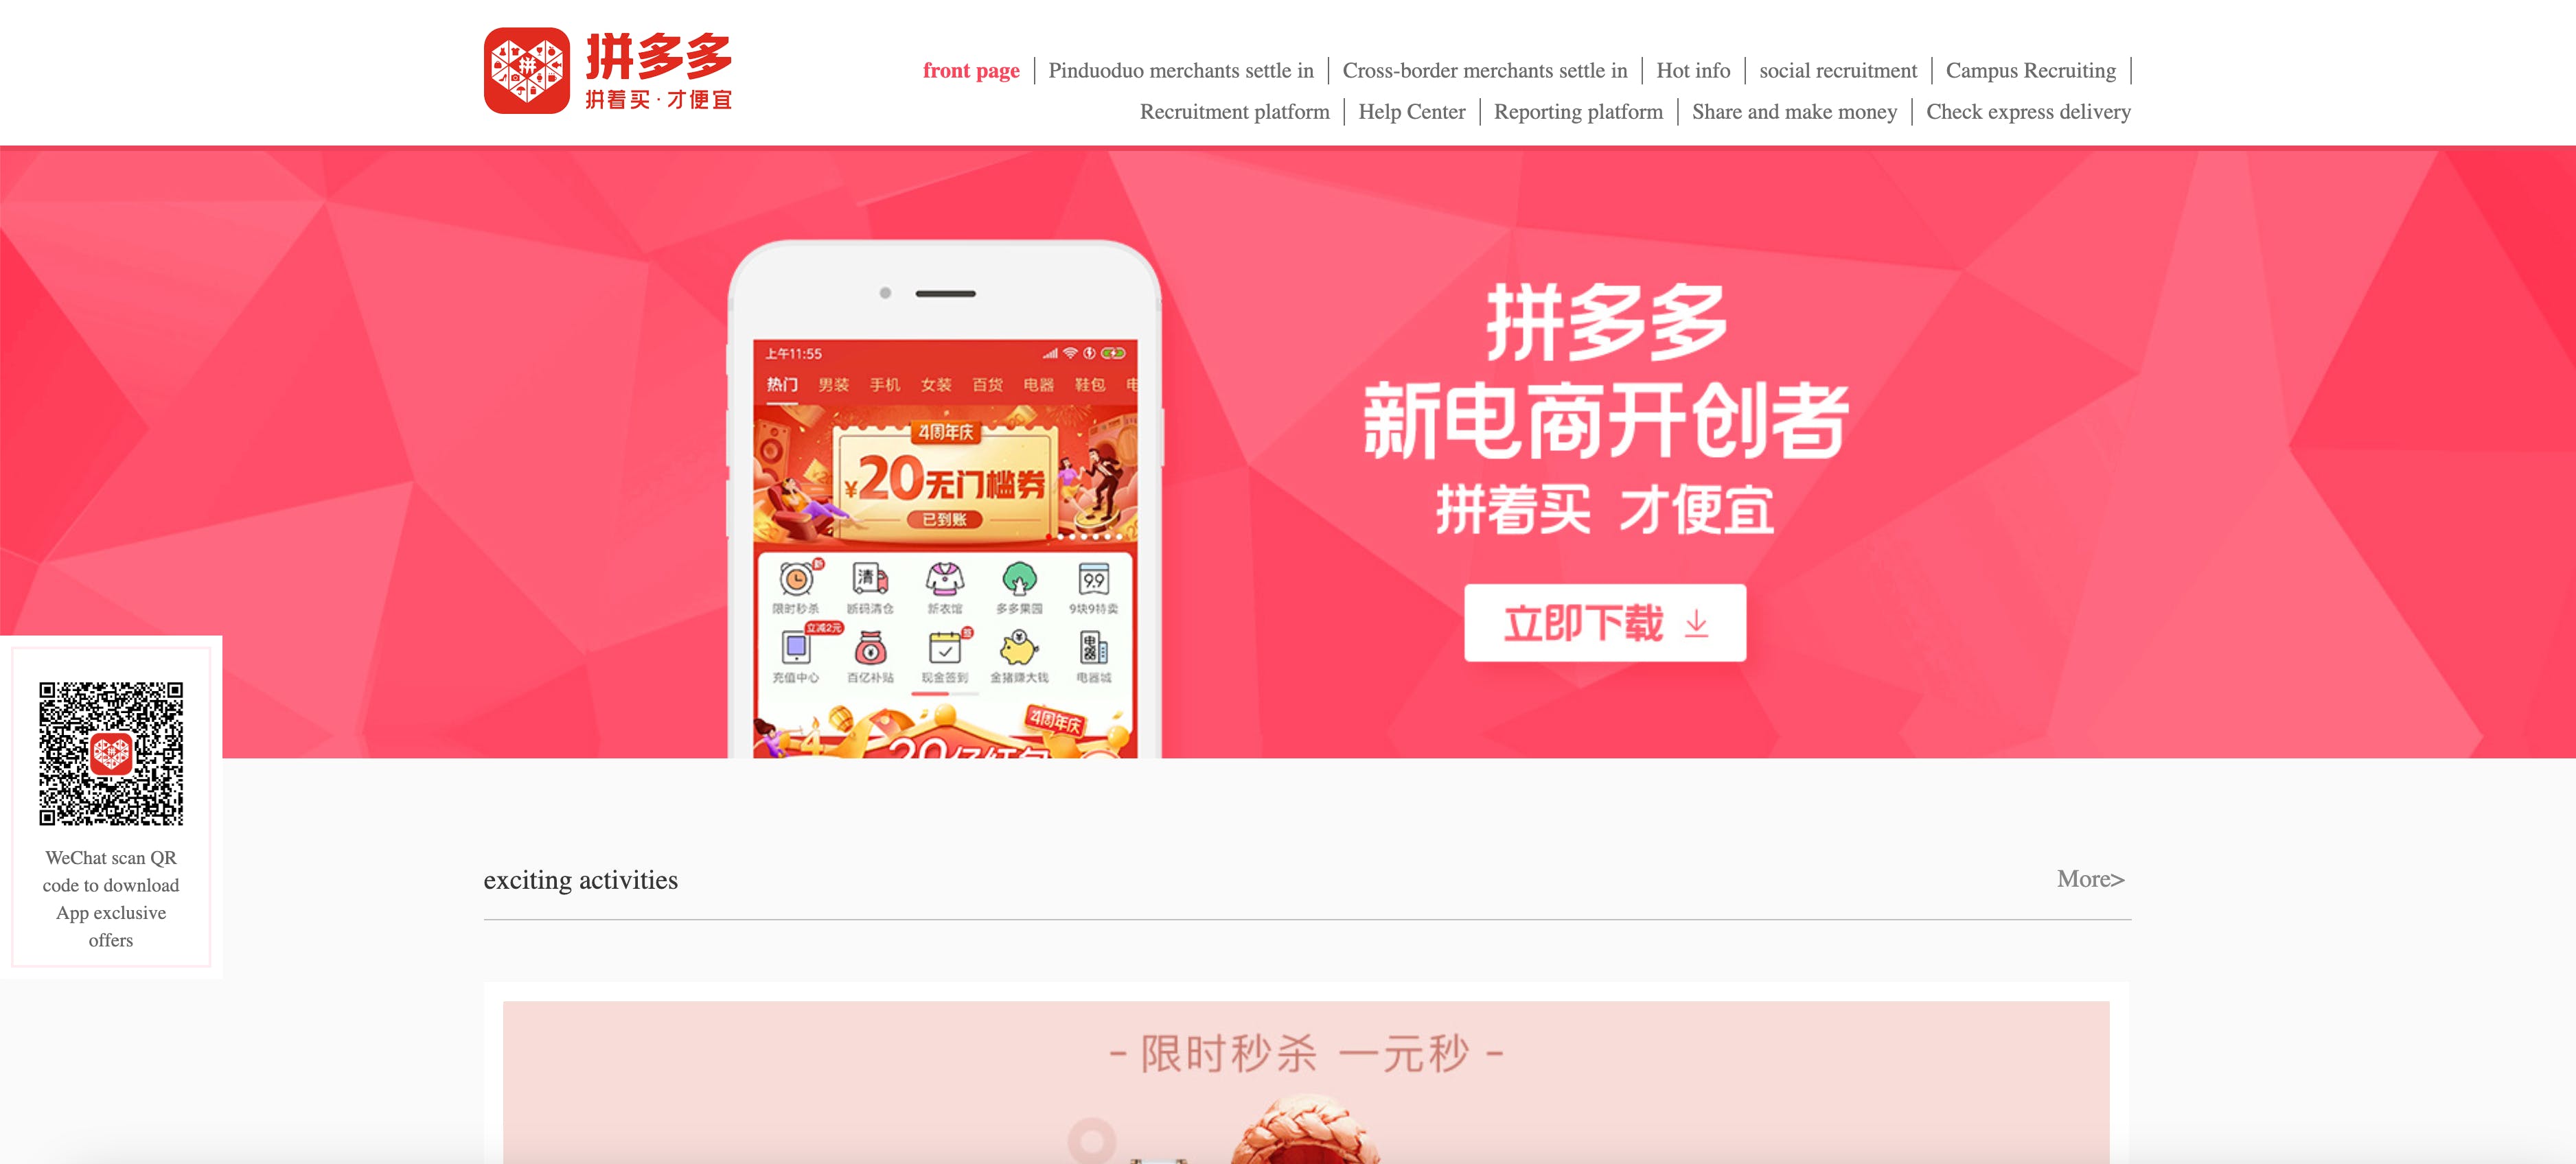 PDD Holdings also owns Pinduoduo, a Chinese online retailer focused on the agriculture industry